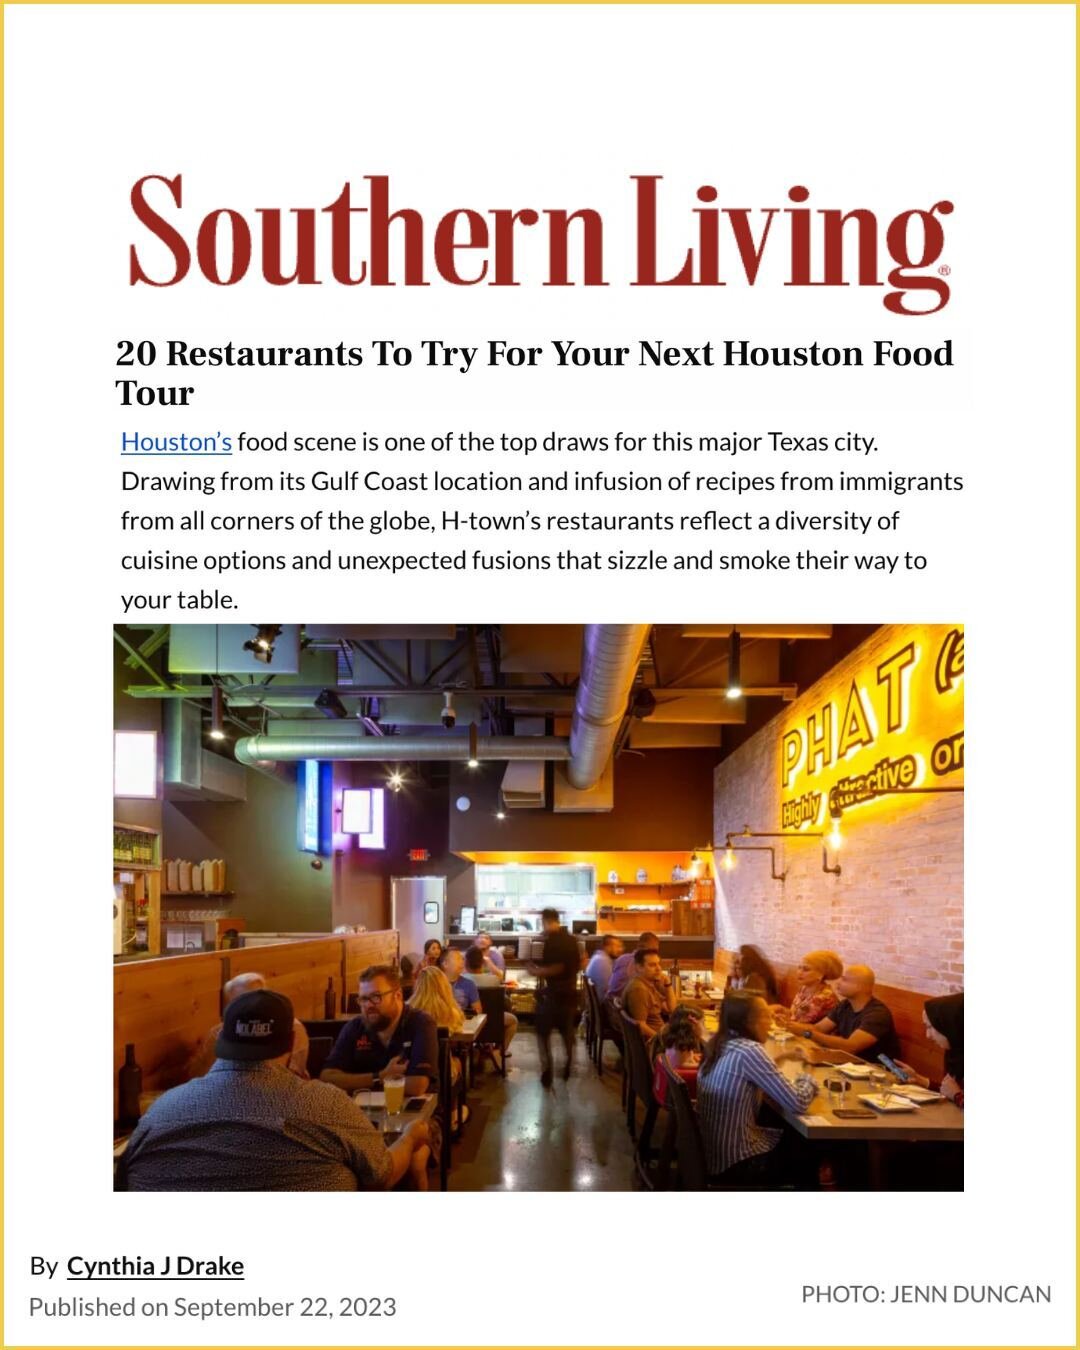 Big congrats to Alex Au-Yeung and the team at Phat Eatery for being named as one of the &quot;20 Best Restaurants in Houston&quot; by Southern Living! 🍽️🤩

Houston's food scene is truly a remarkable symphony of cultures and flavors and Phat Eatery 